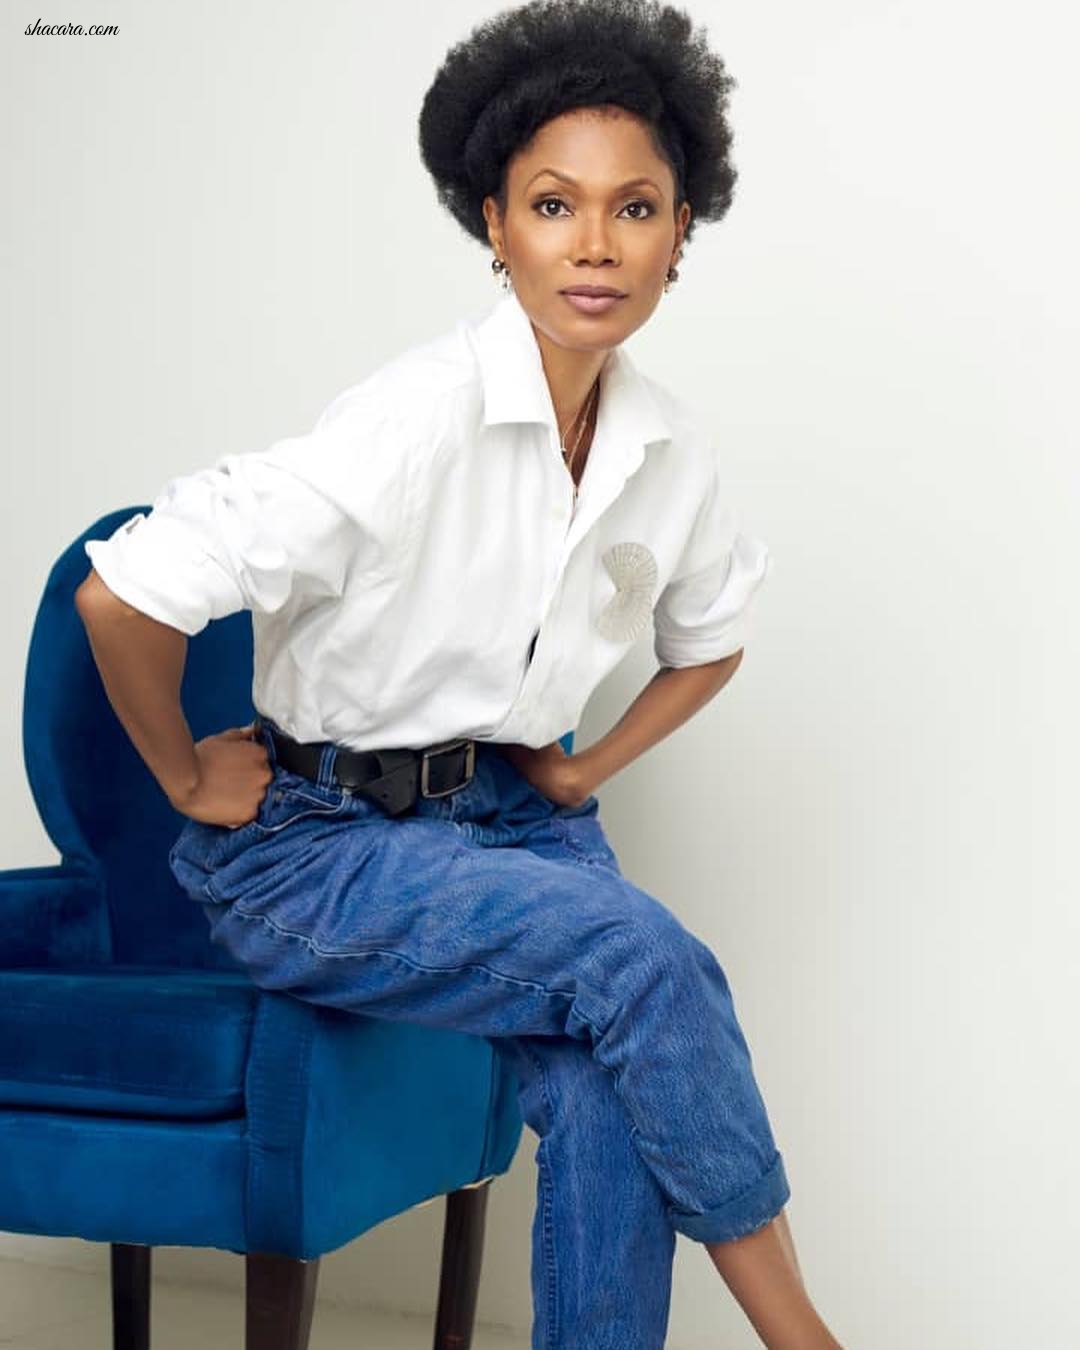 Funmi Iyanda Is A Bombshell Beauty On The Latest Issue Of Guardian Life Magazine